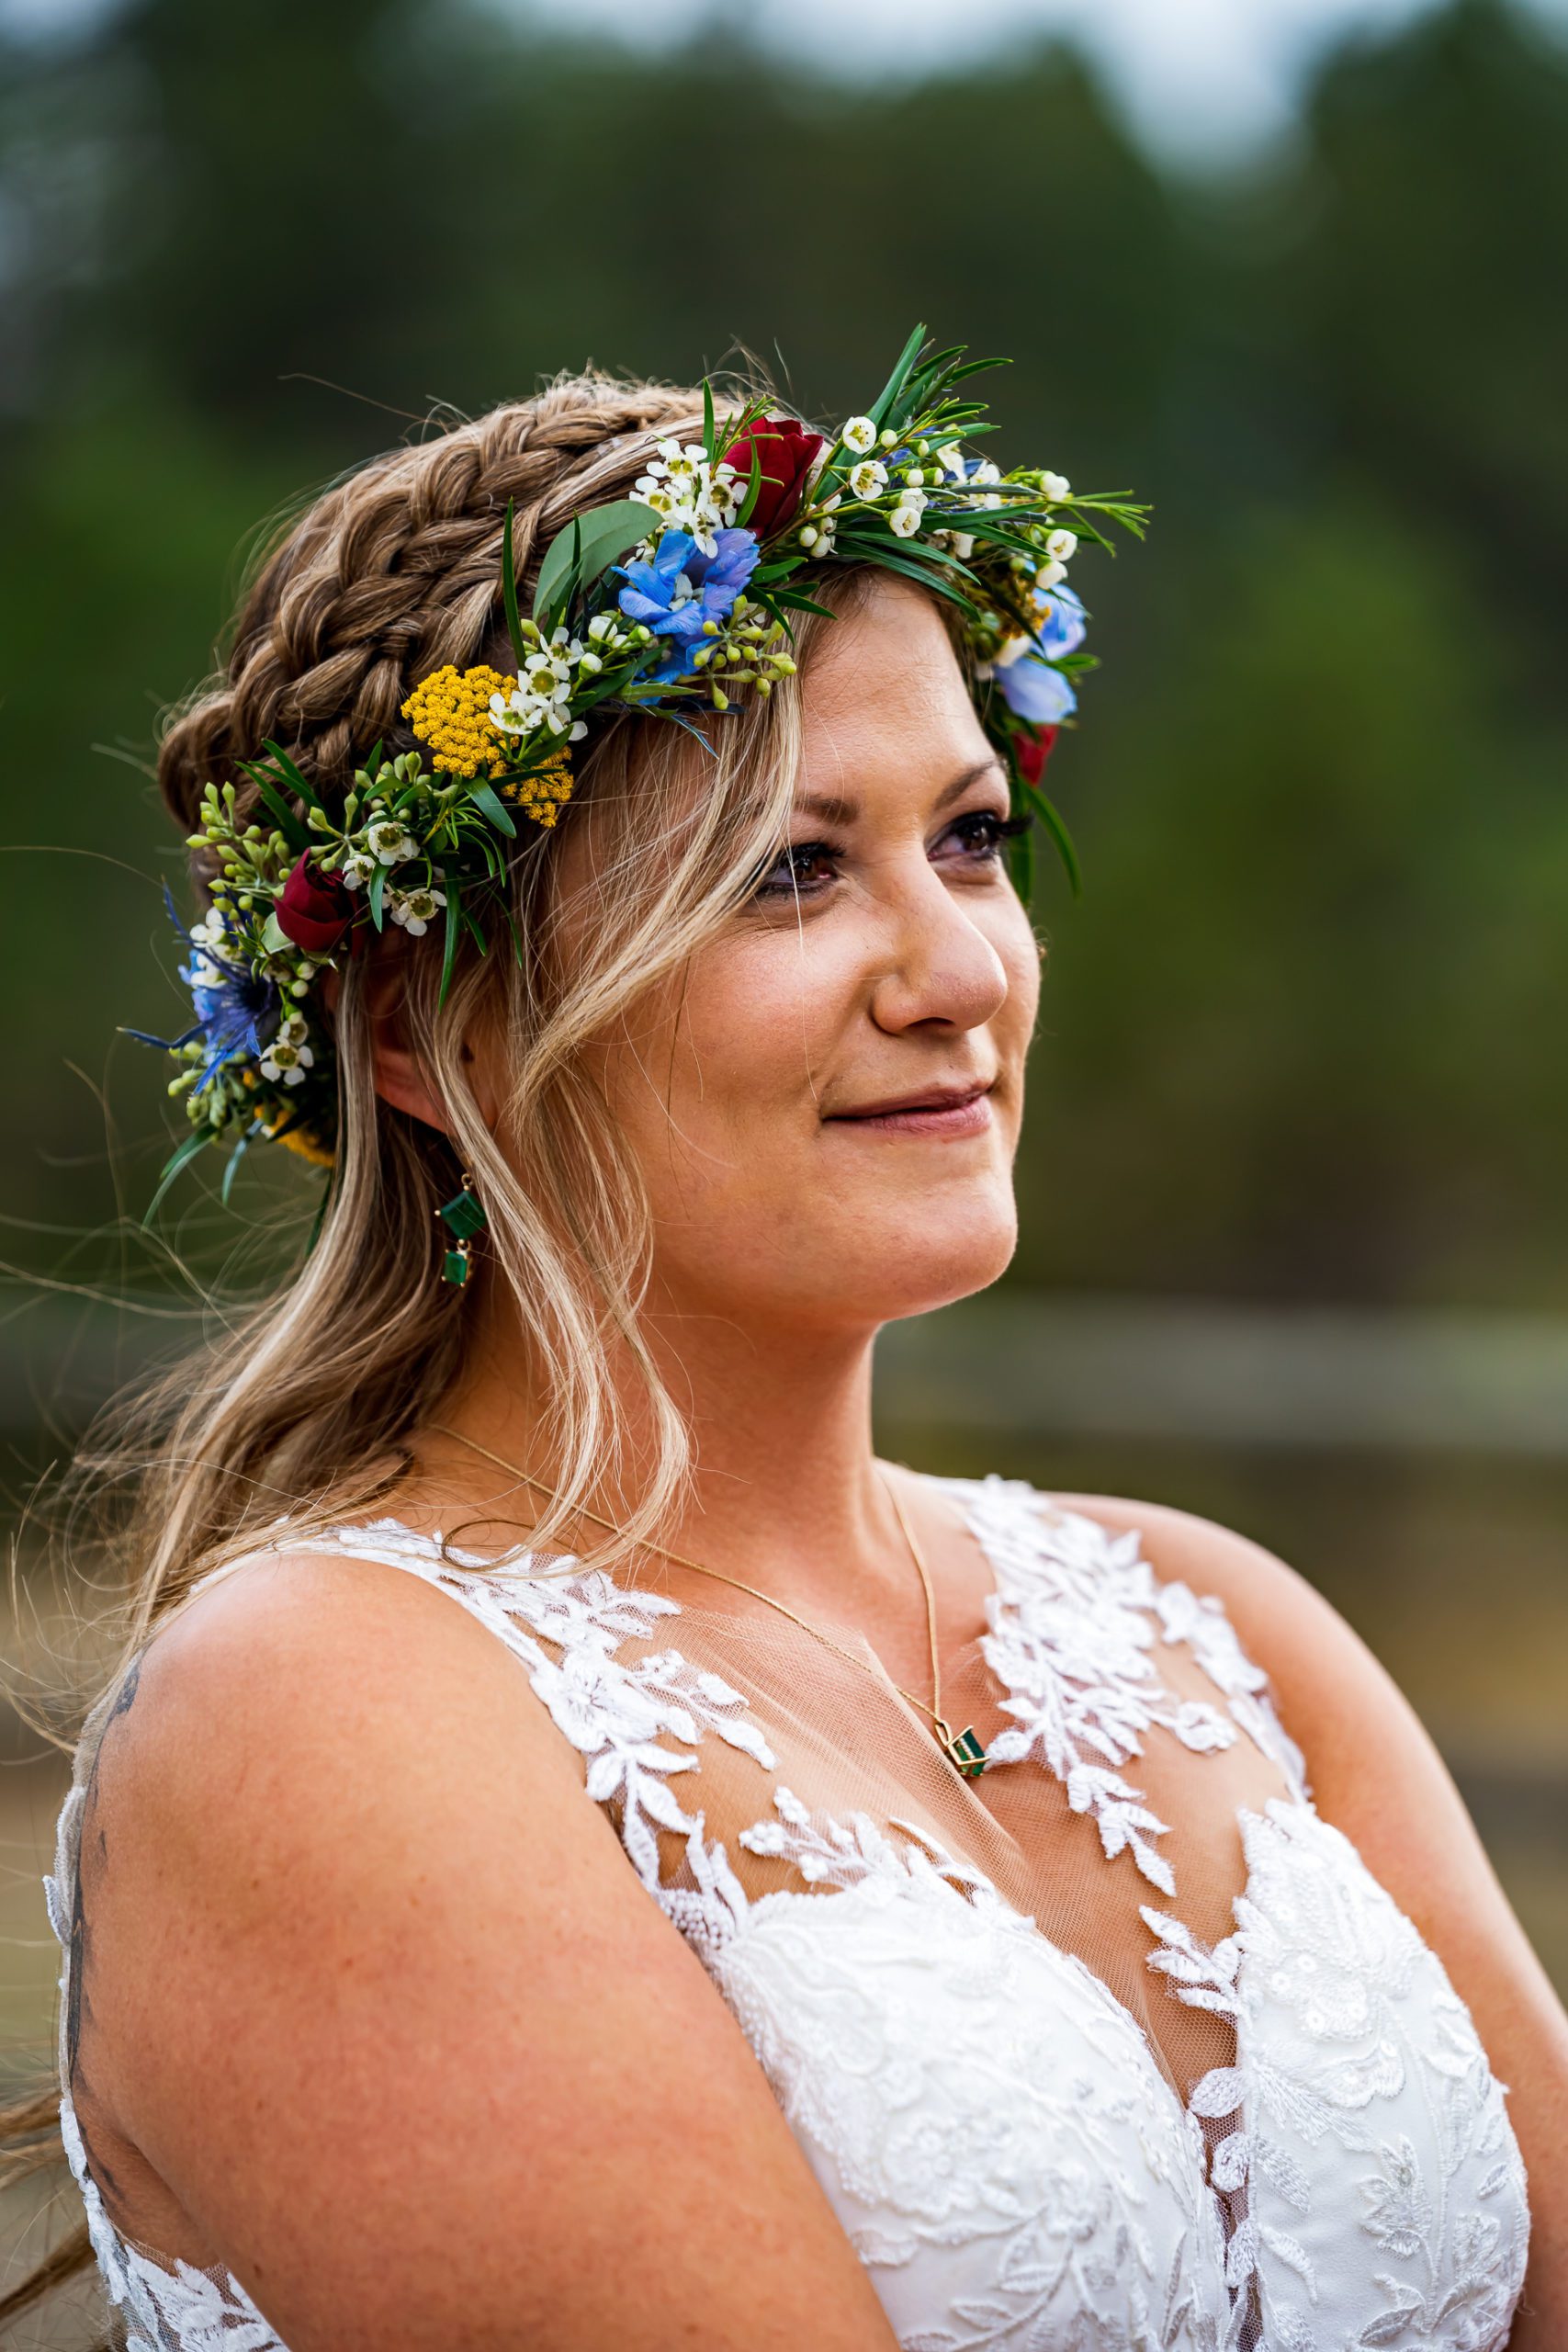 A bride with blonde hair, white dress and blue and yellow flower crown.